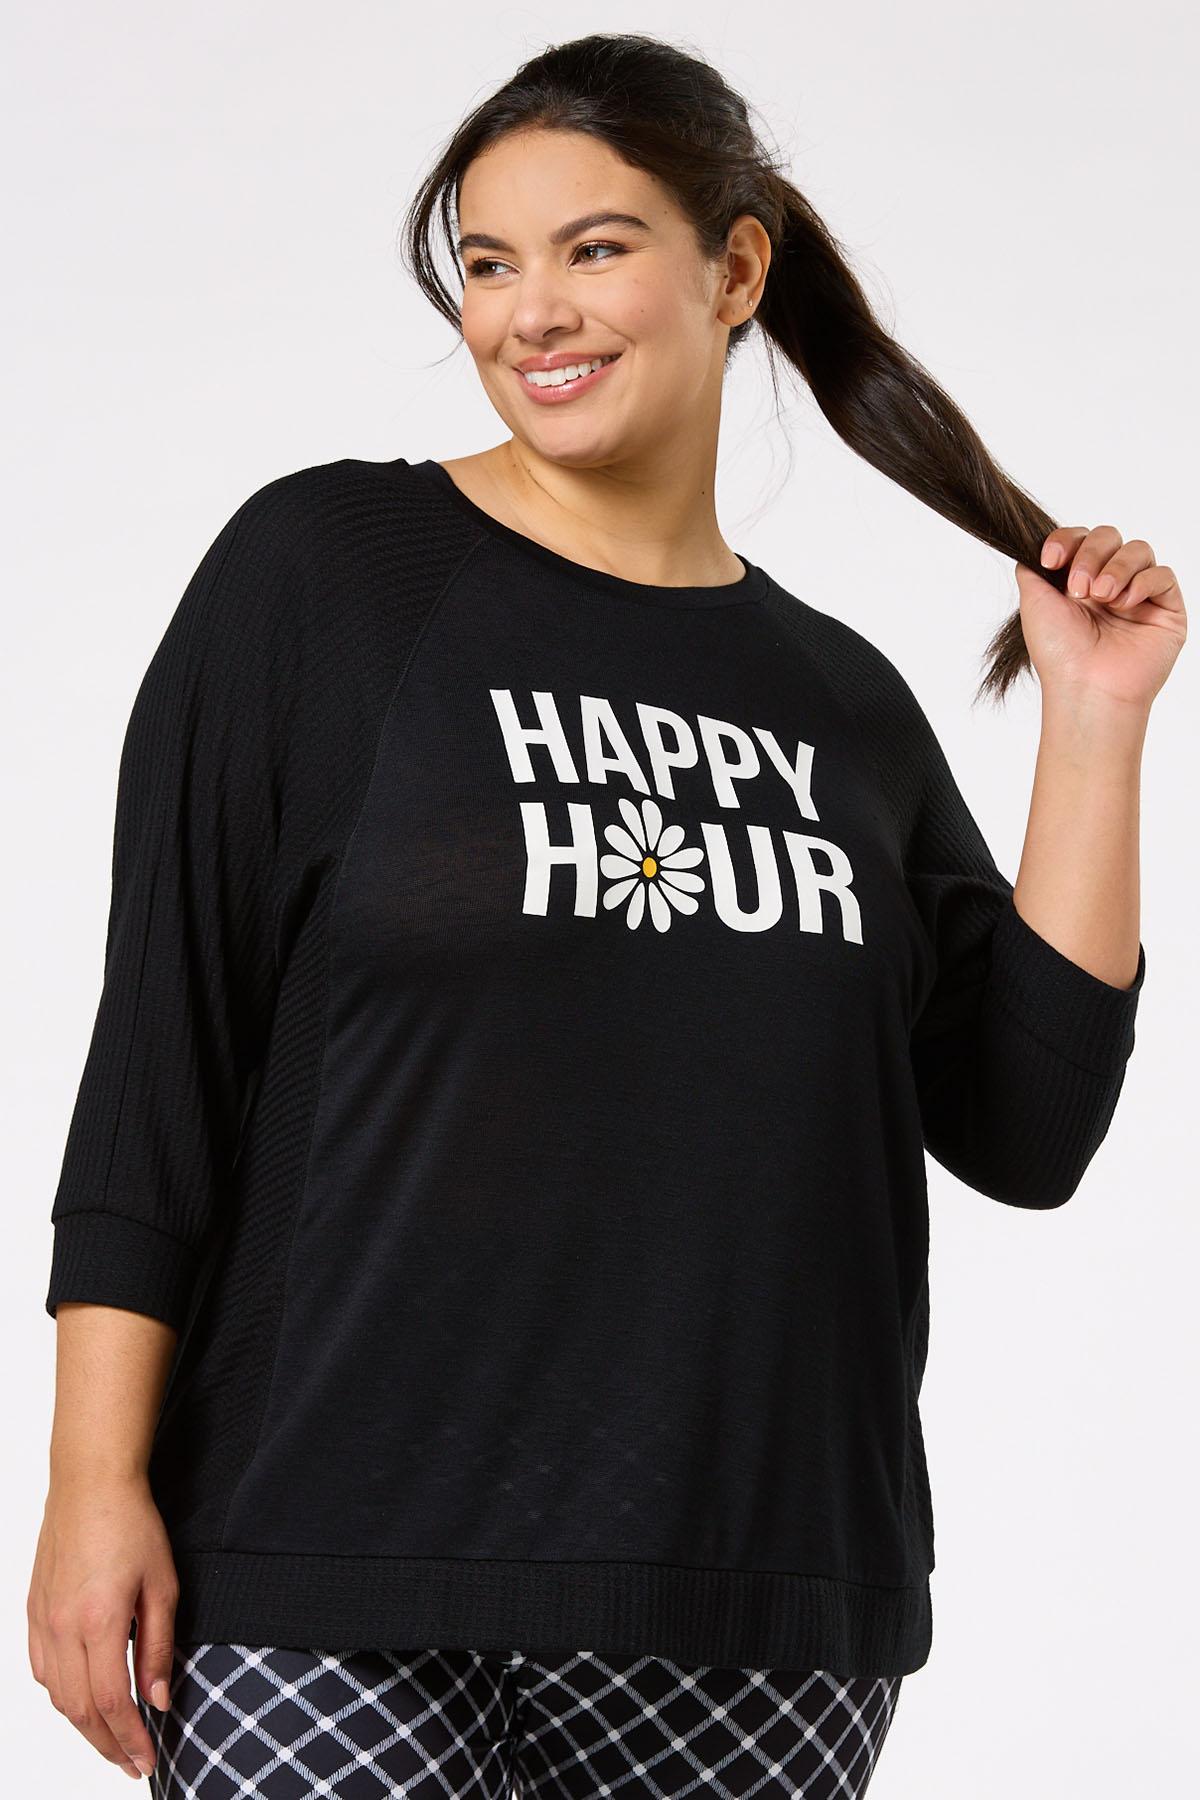 Cato Fashions  Cato Plus Size Happy Hour Waffle Top